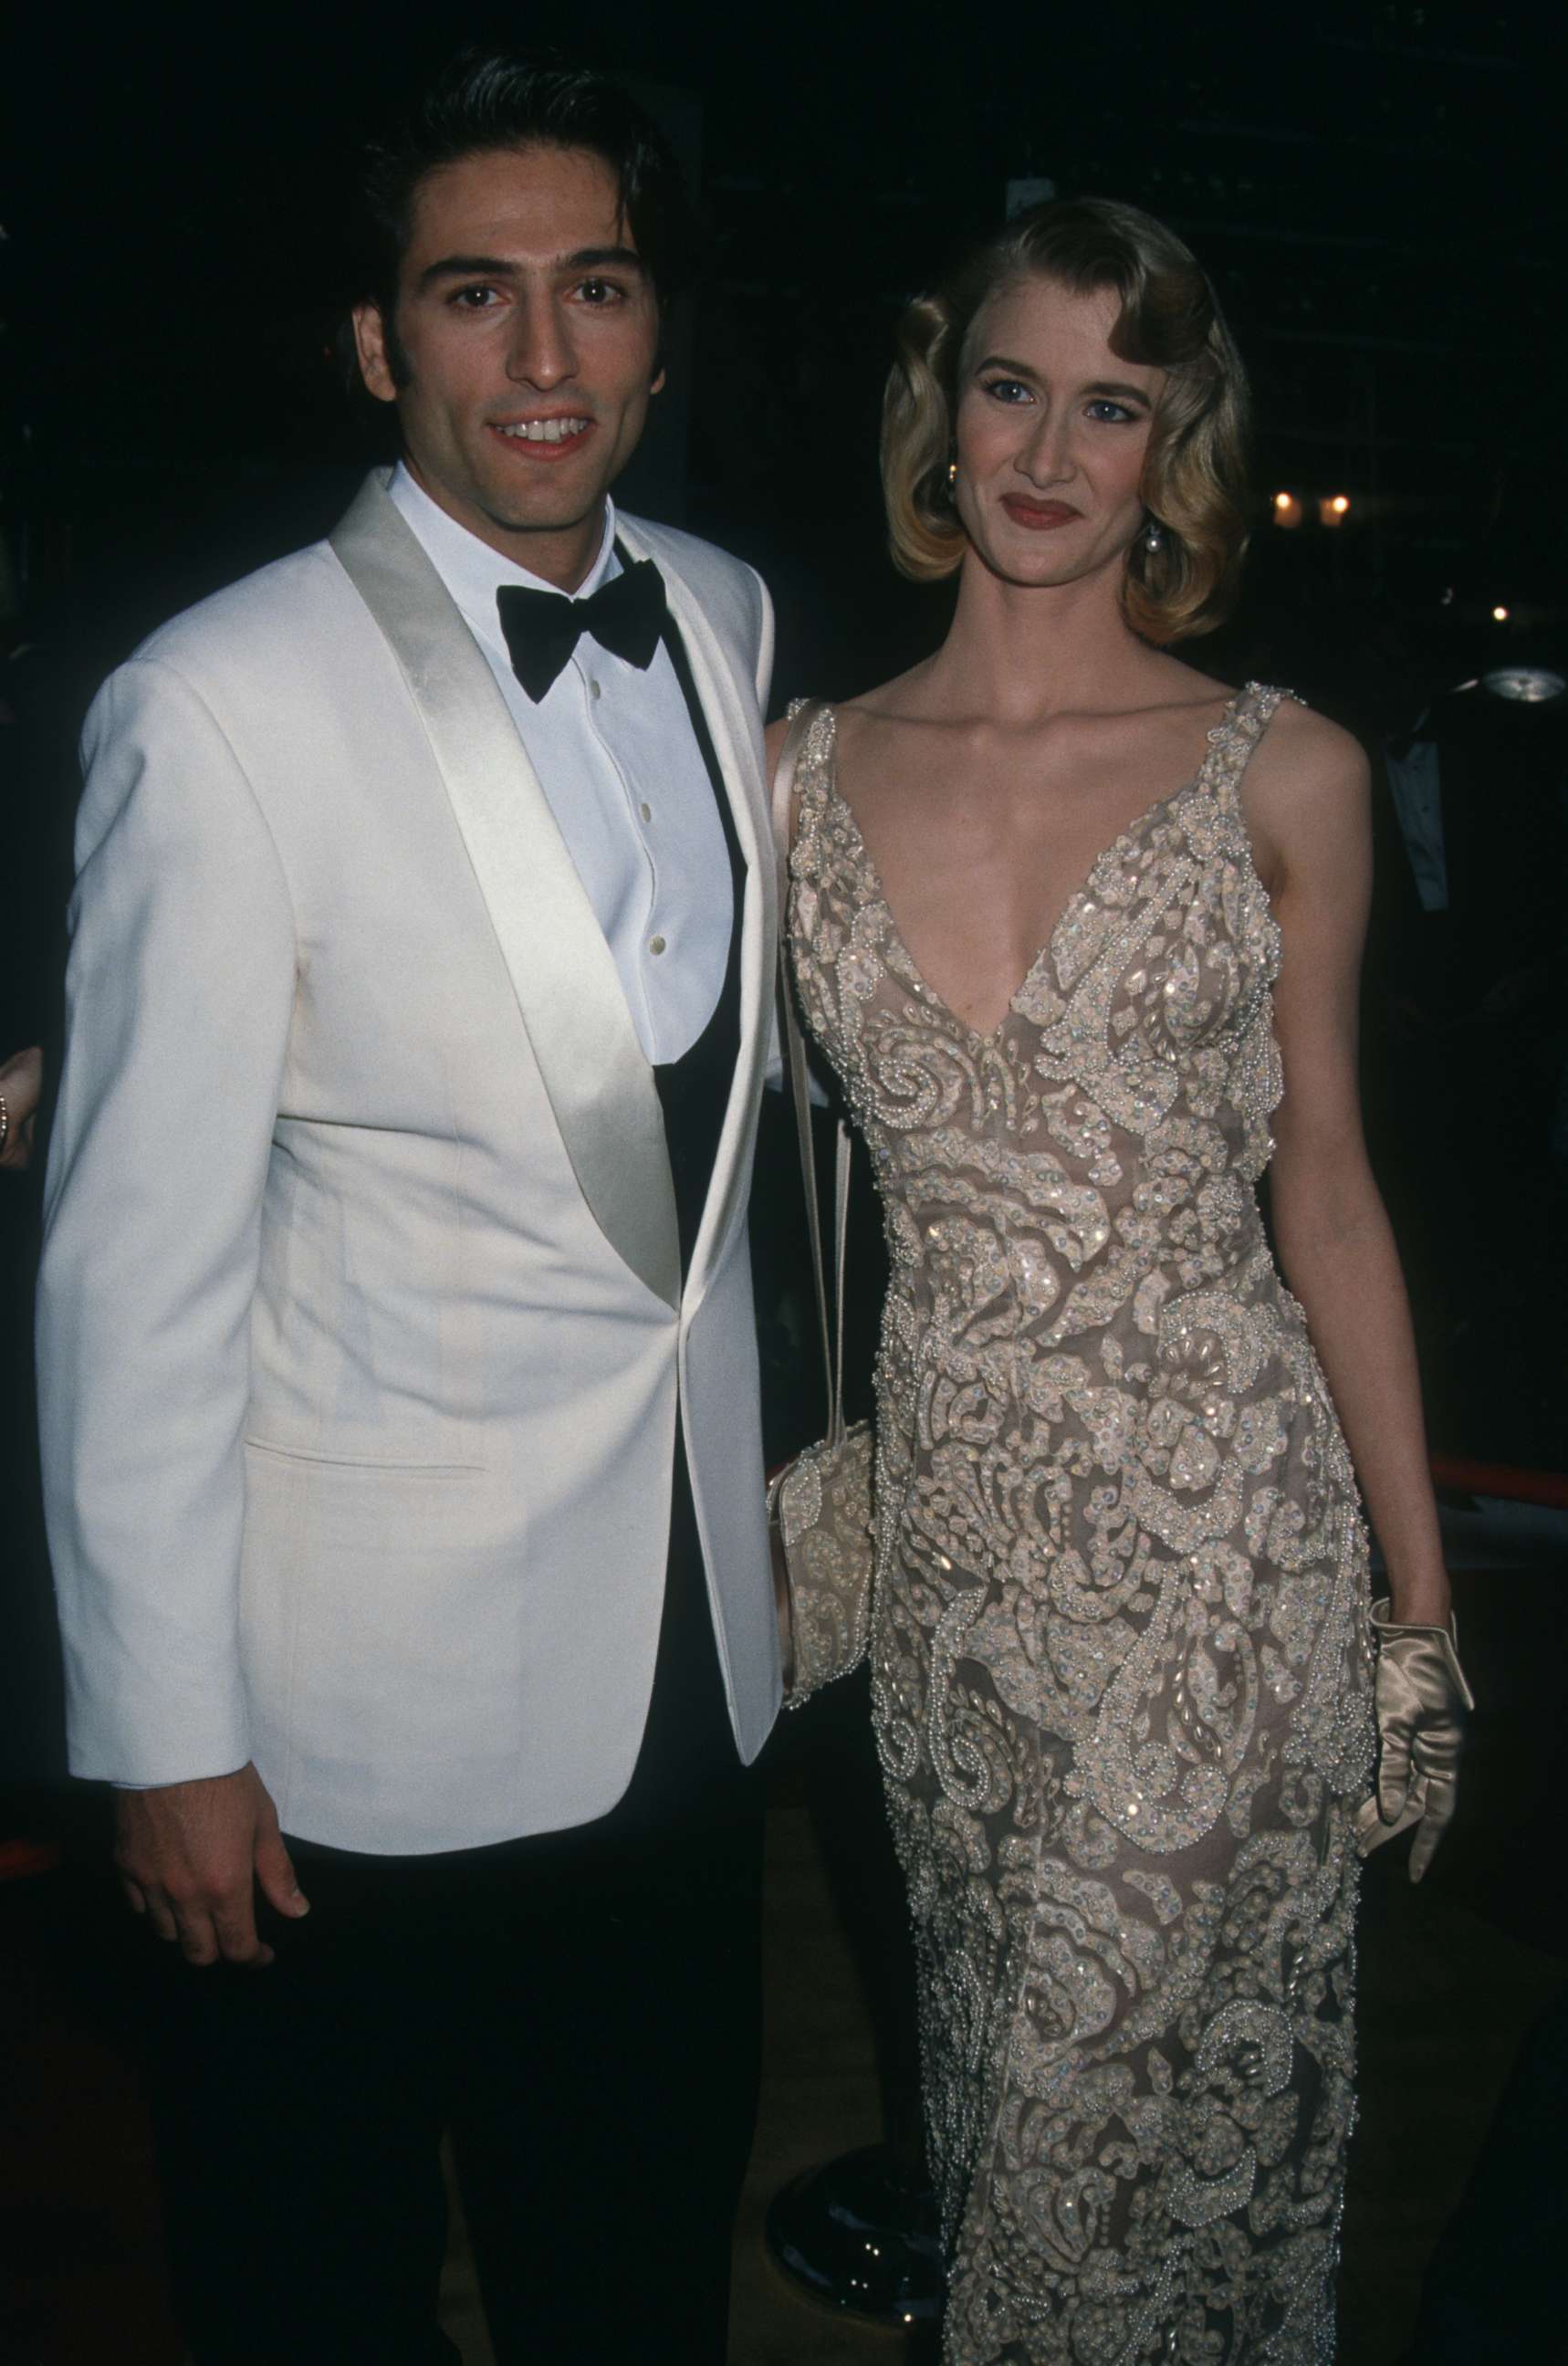 PHOTO: Actress Laura Dern and date Vincent Spano attending 64th Annual Academy Awards on March 30, 1992 at the Dorothy Chandler Pavilion in Los Angeles, California. (Photo by Ron Galella, Ltd./Ron Galella Collection via Getty Images)